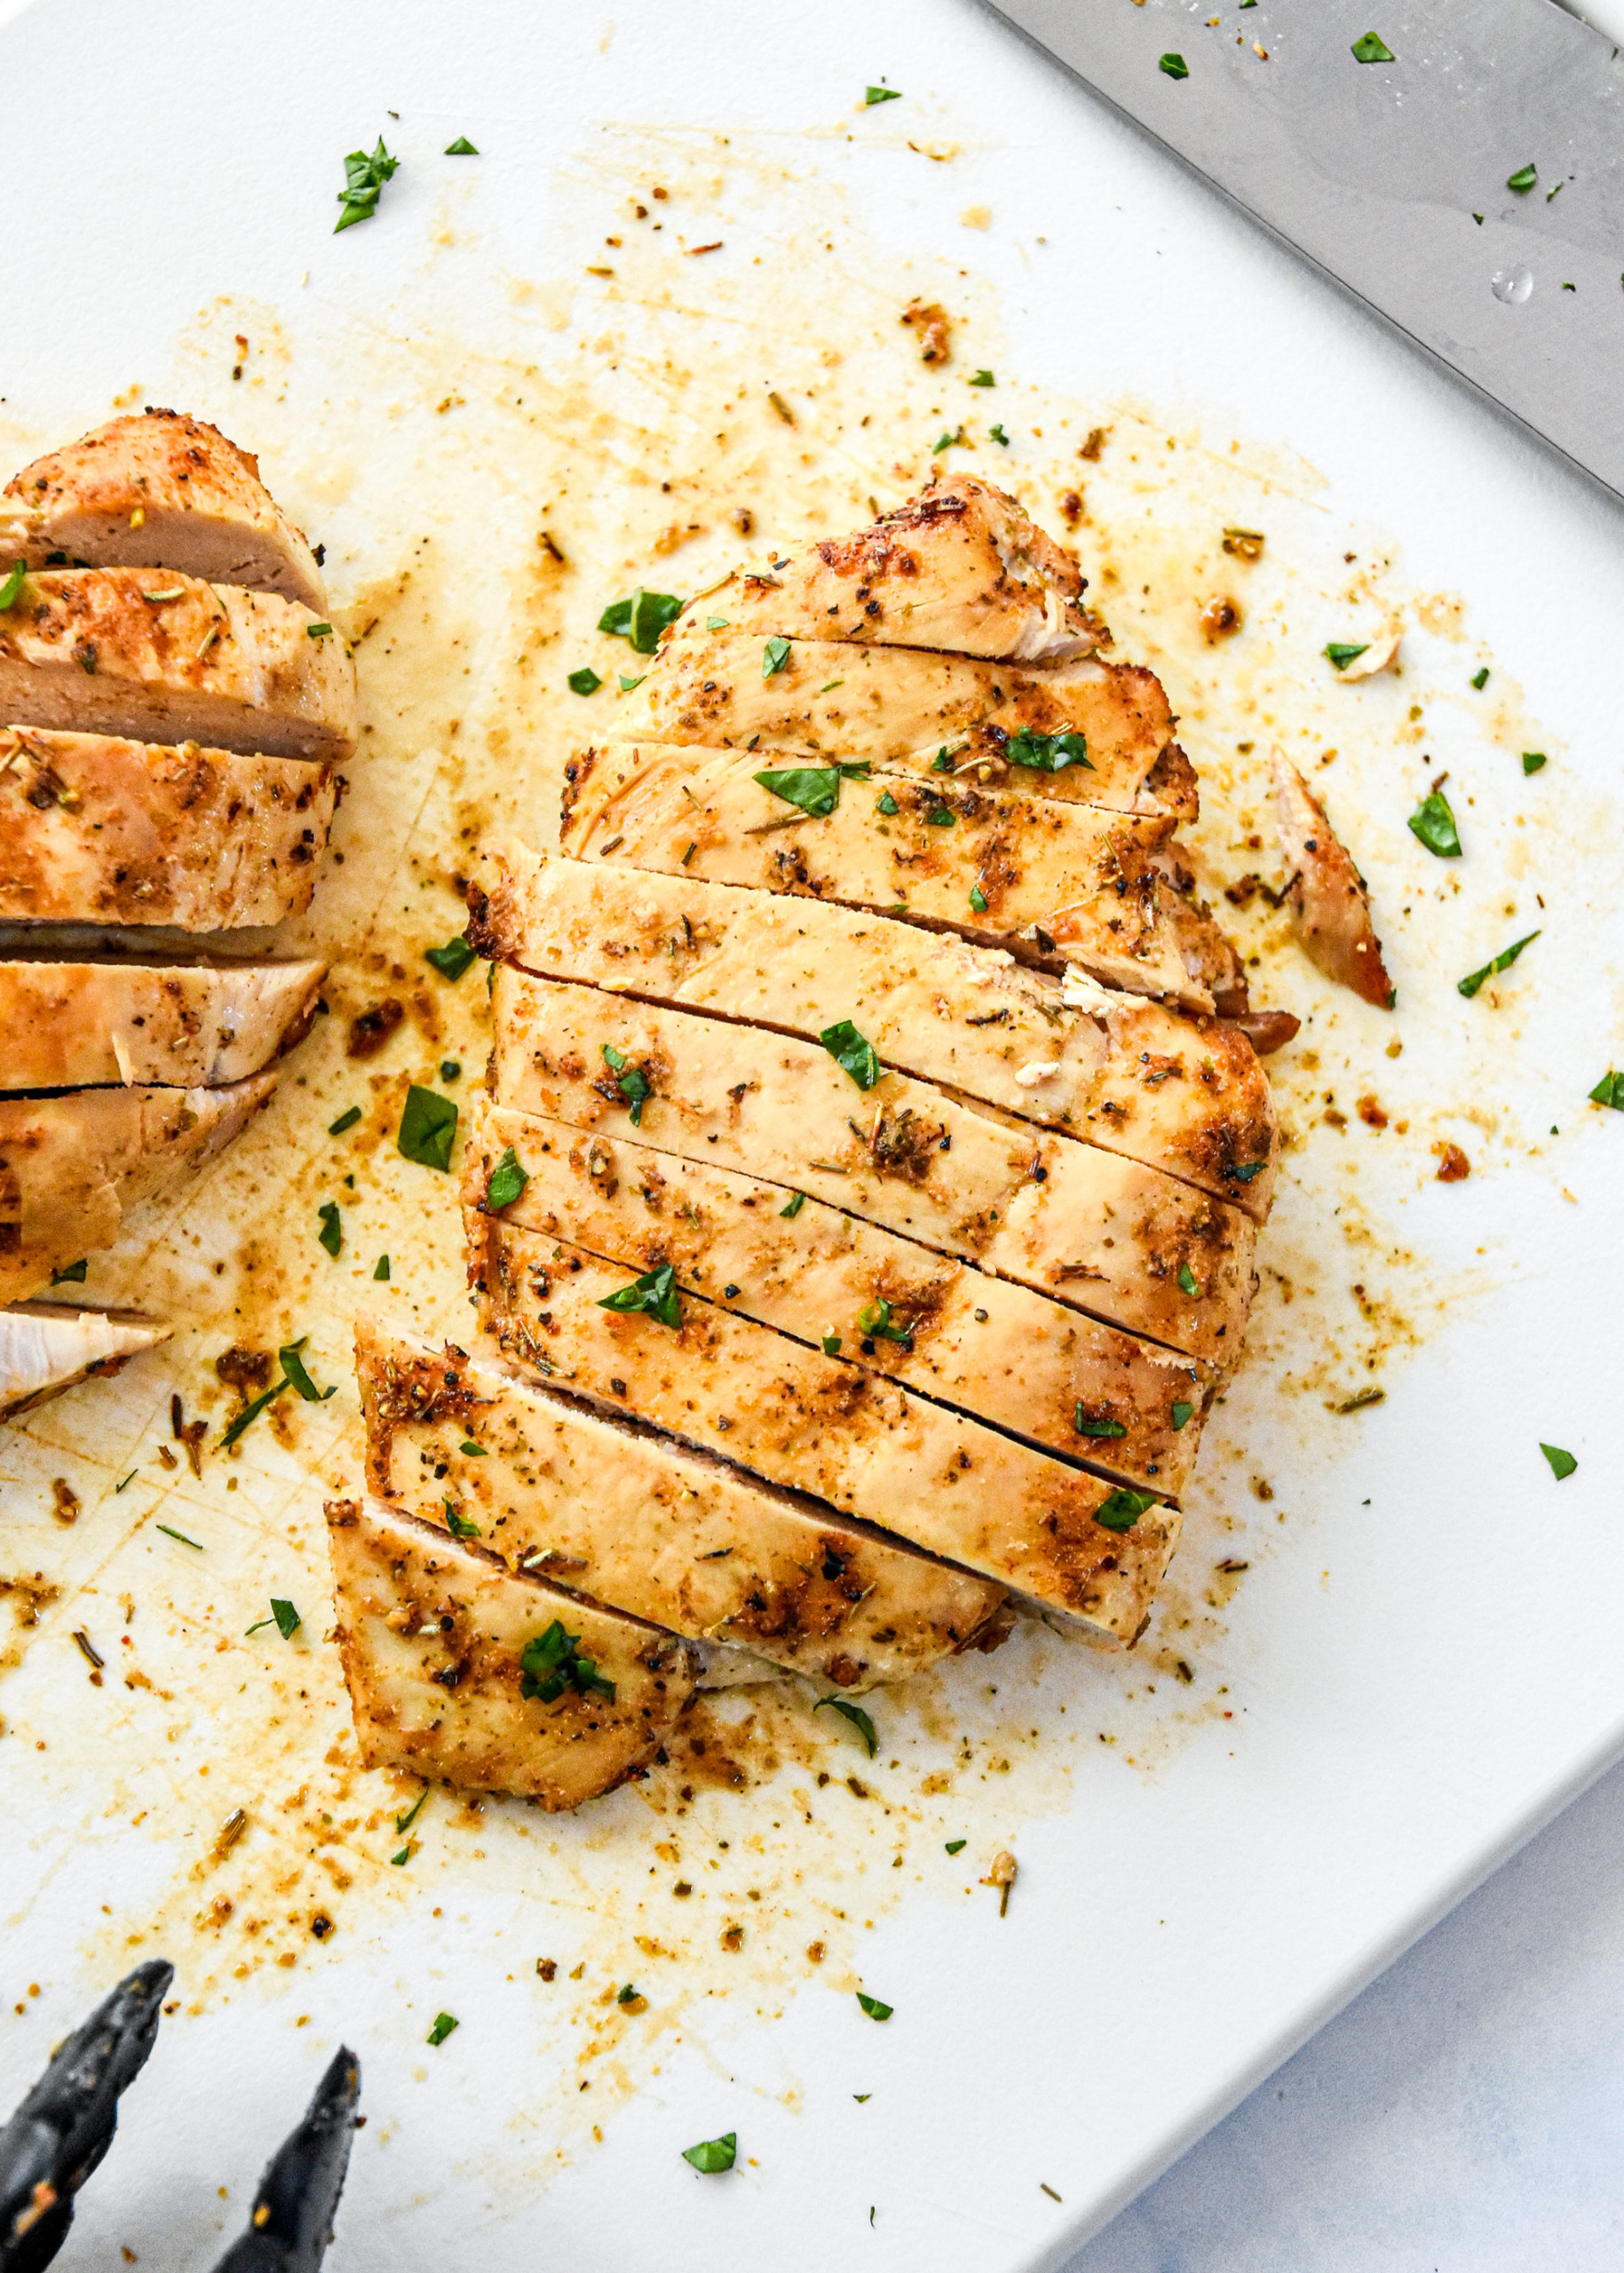 The Juiciest Air Fryer Chicken Breast - Simply Delicious